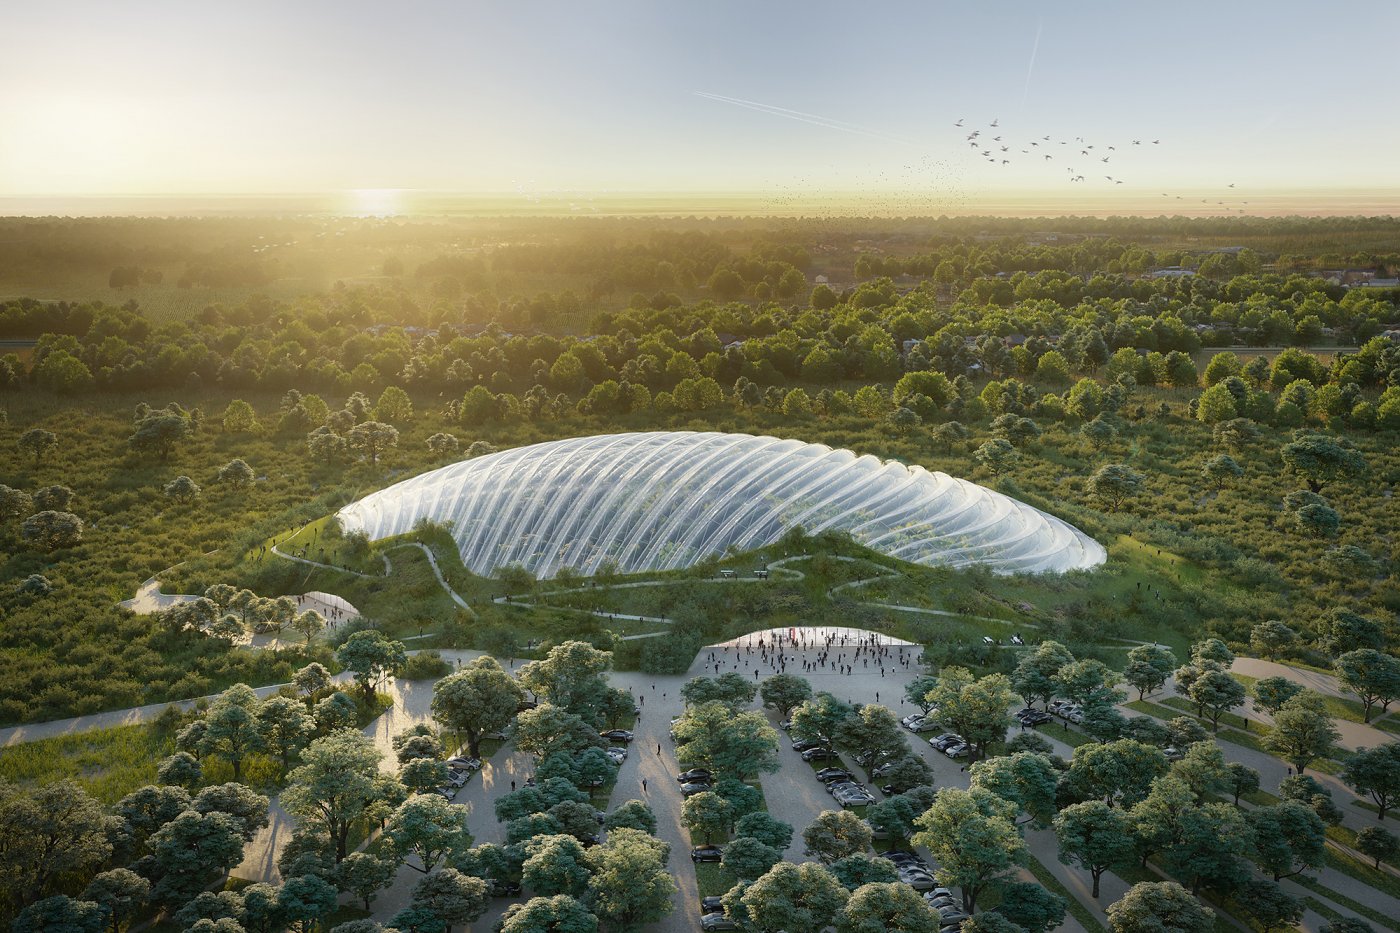 The world’s largest single dome tropical greenhouse